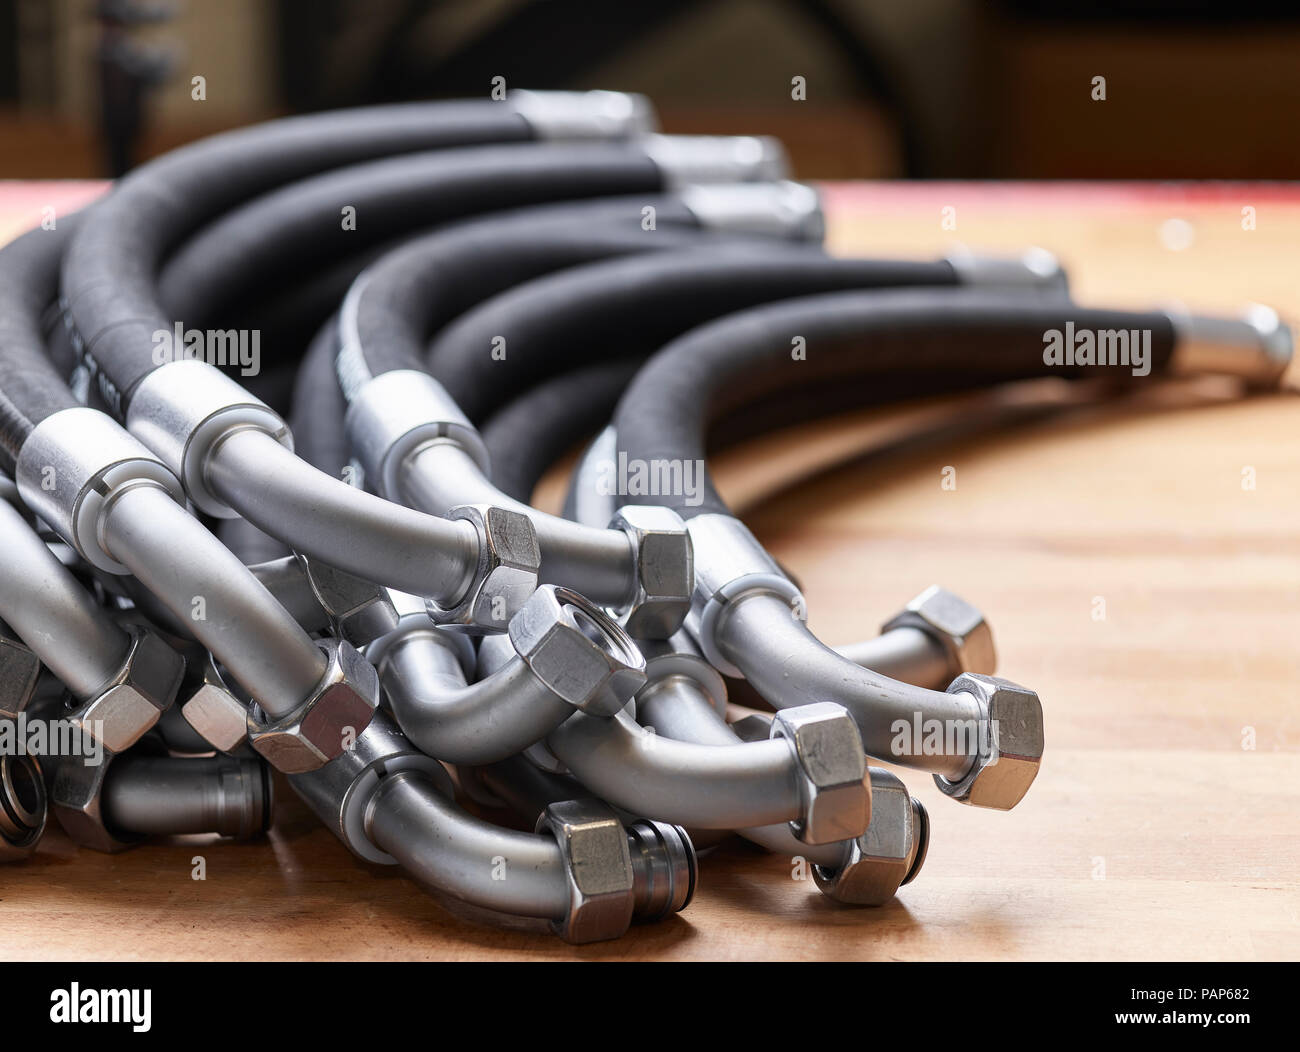 Hose and hose connections Stock Photo